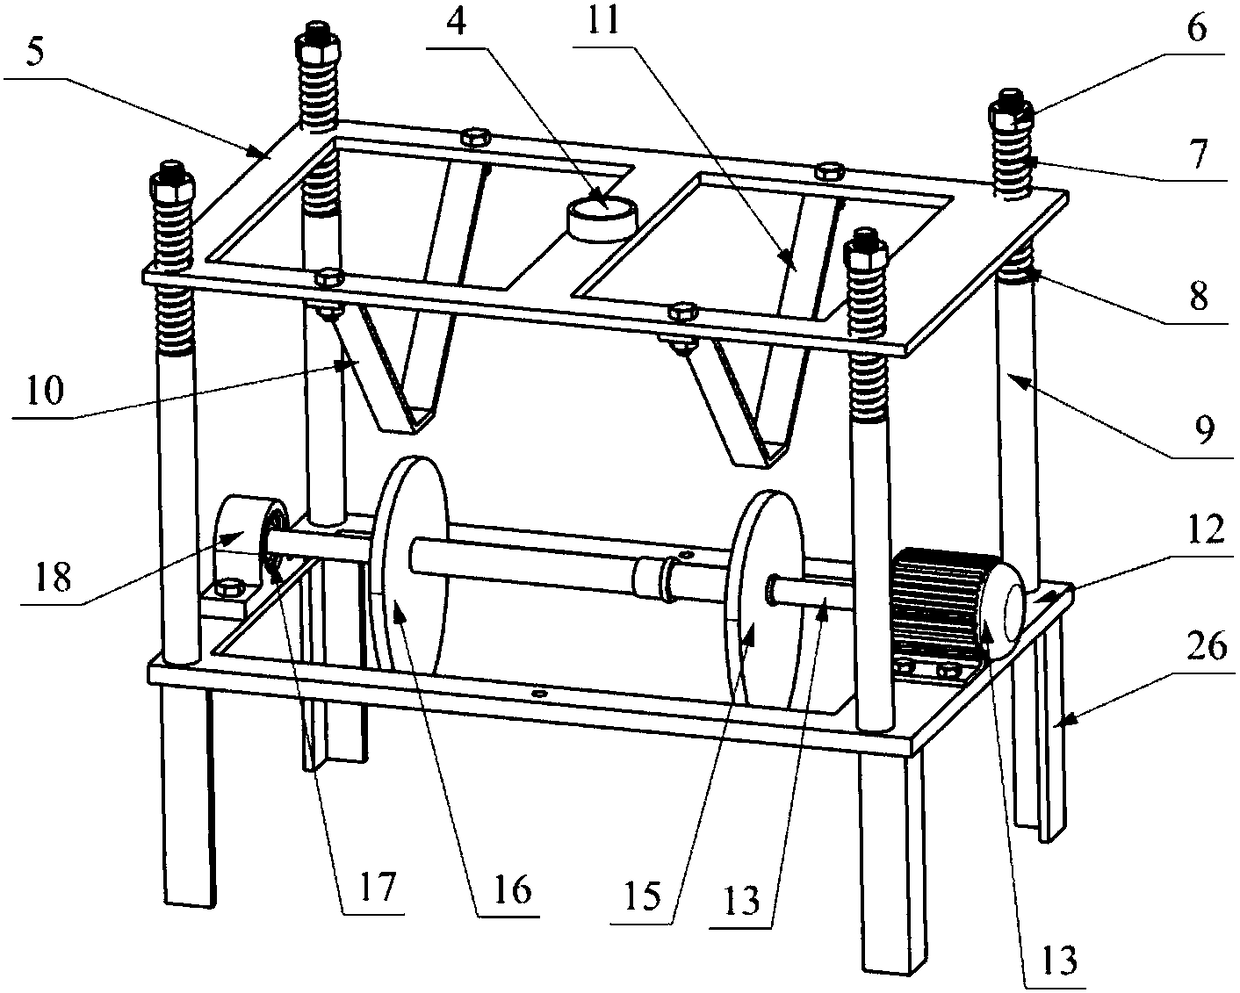 A vibrating and rotating animal experiment mechanism